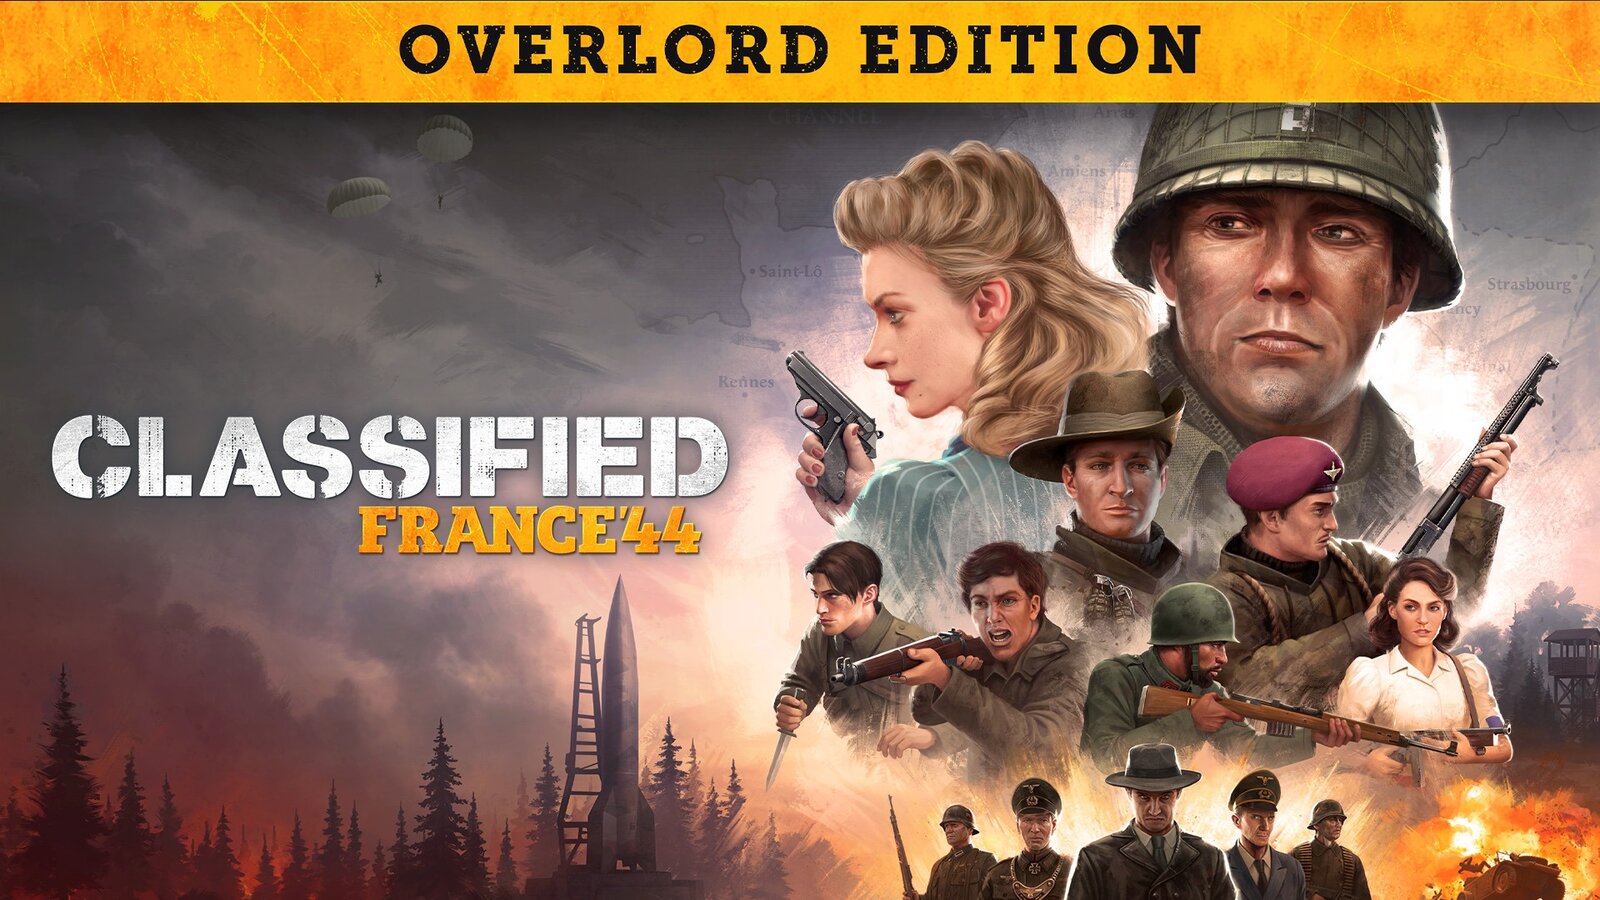 Classified: France '44 - The Overlord Edition